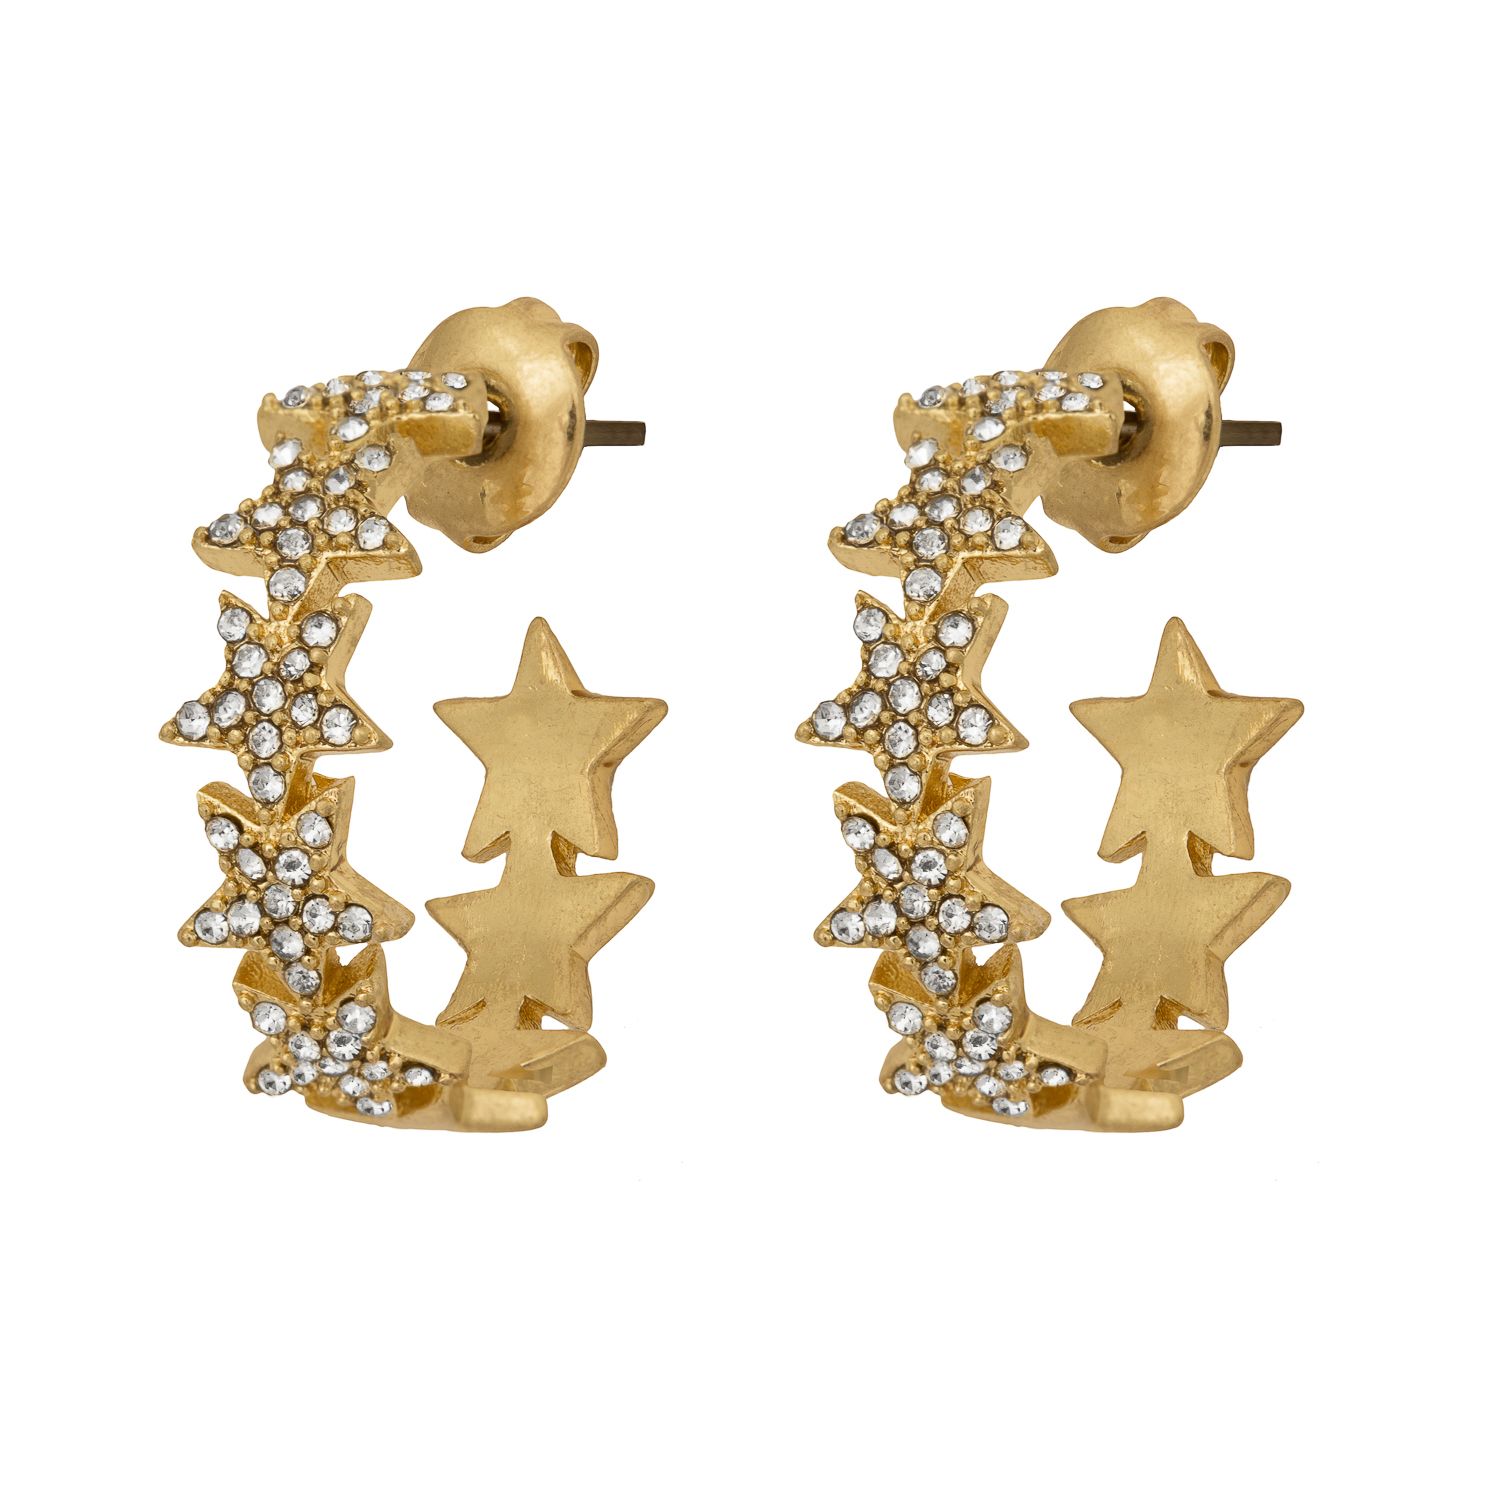 Unleash the twinkling star in you attracting attention with a subtle, yet sparkling style that can't be missed. Dazzle into the new season with these gold plated sparkly star earrings that are perfect for everyday wear for any occasion! The delicate gold tone earrings feature beautiful pave stars with a depth of 20mm. Presented in a KTx jewellery pouch to keep your jewellery safe or ideal for gifting!